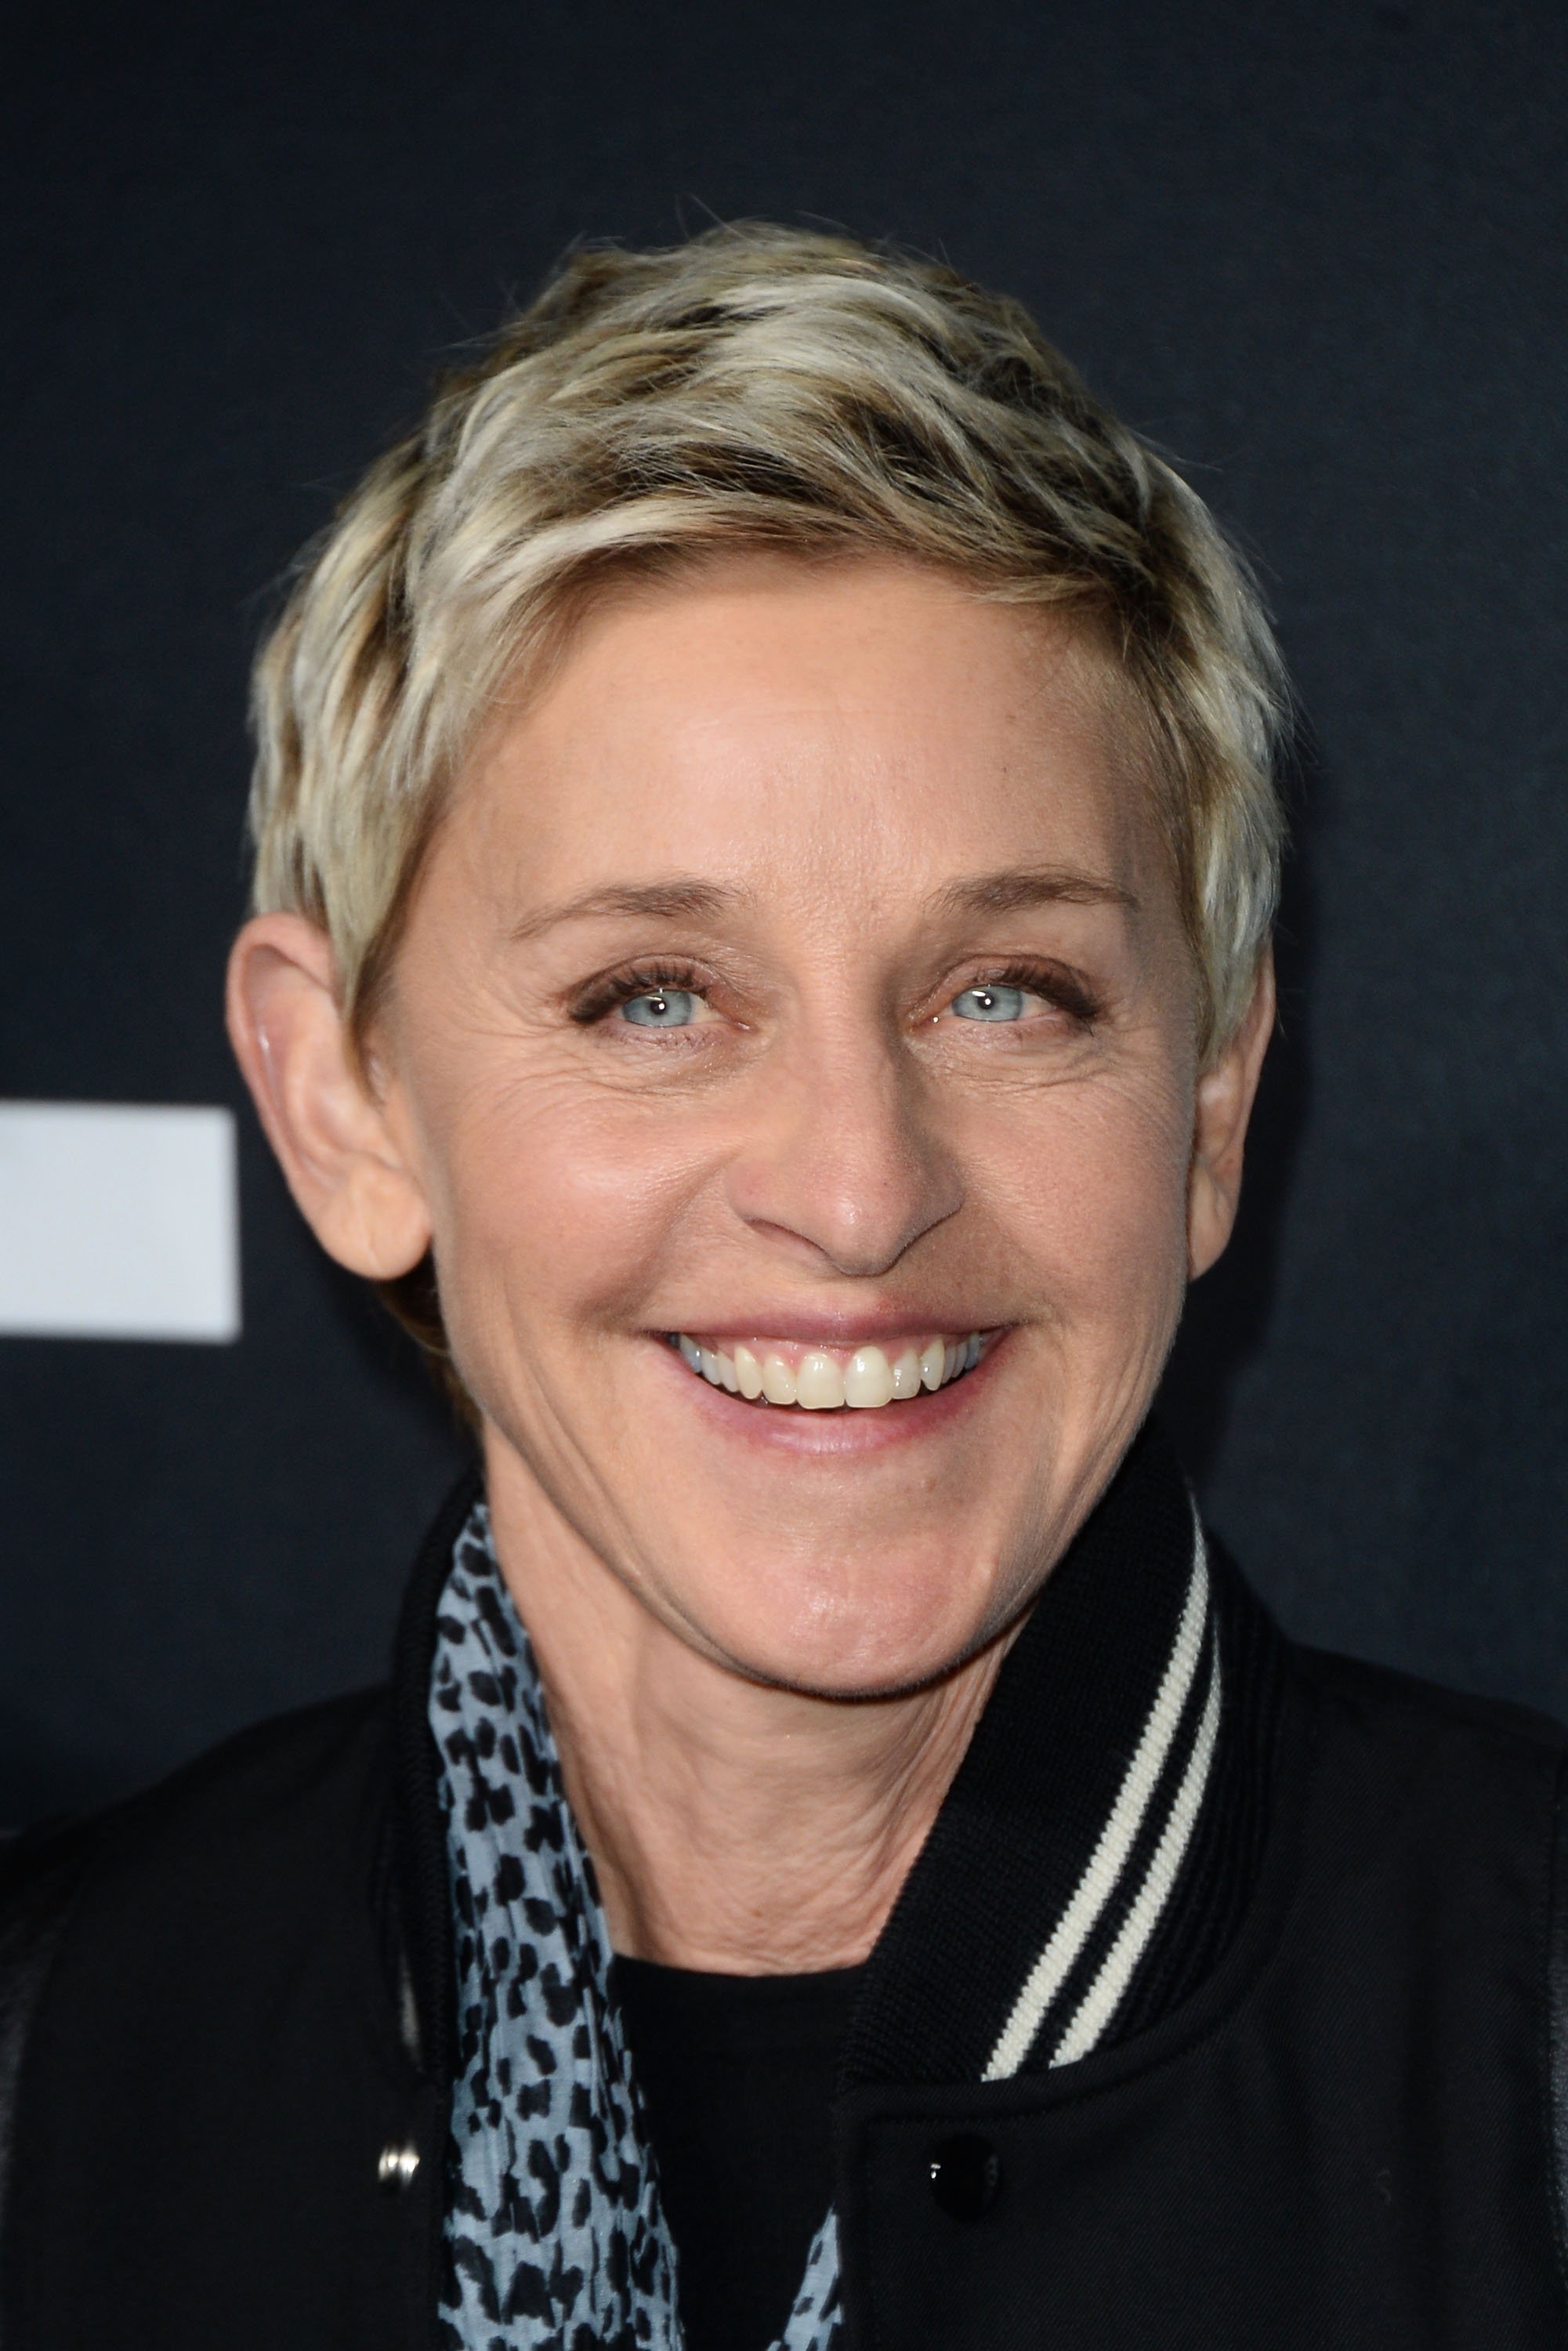 Ellen DeGeneres attends the Saint Laurent Show in Los Angeles, California on February 10, 2016 | Photo: Getty Images